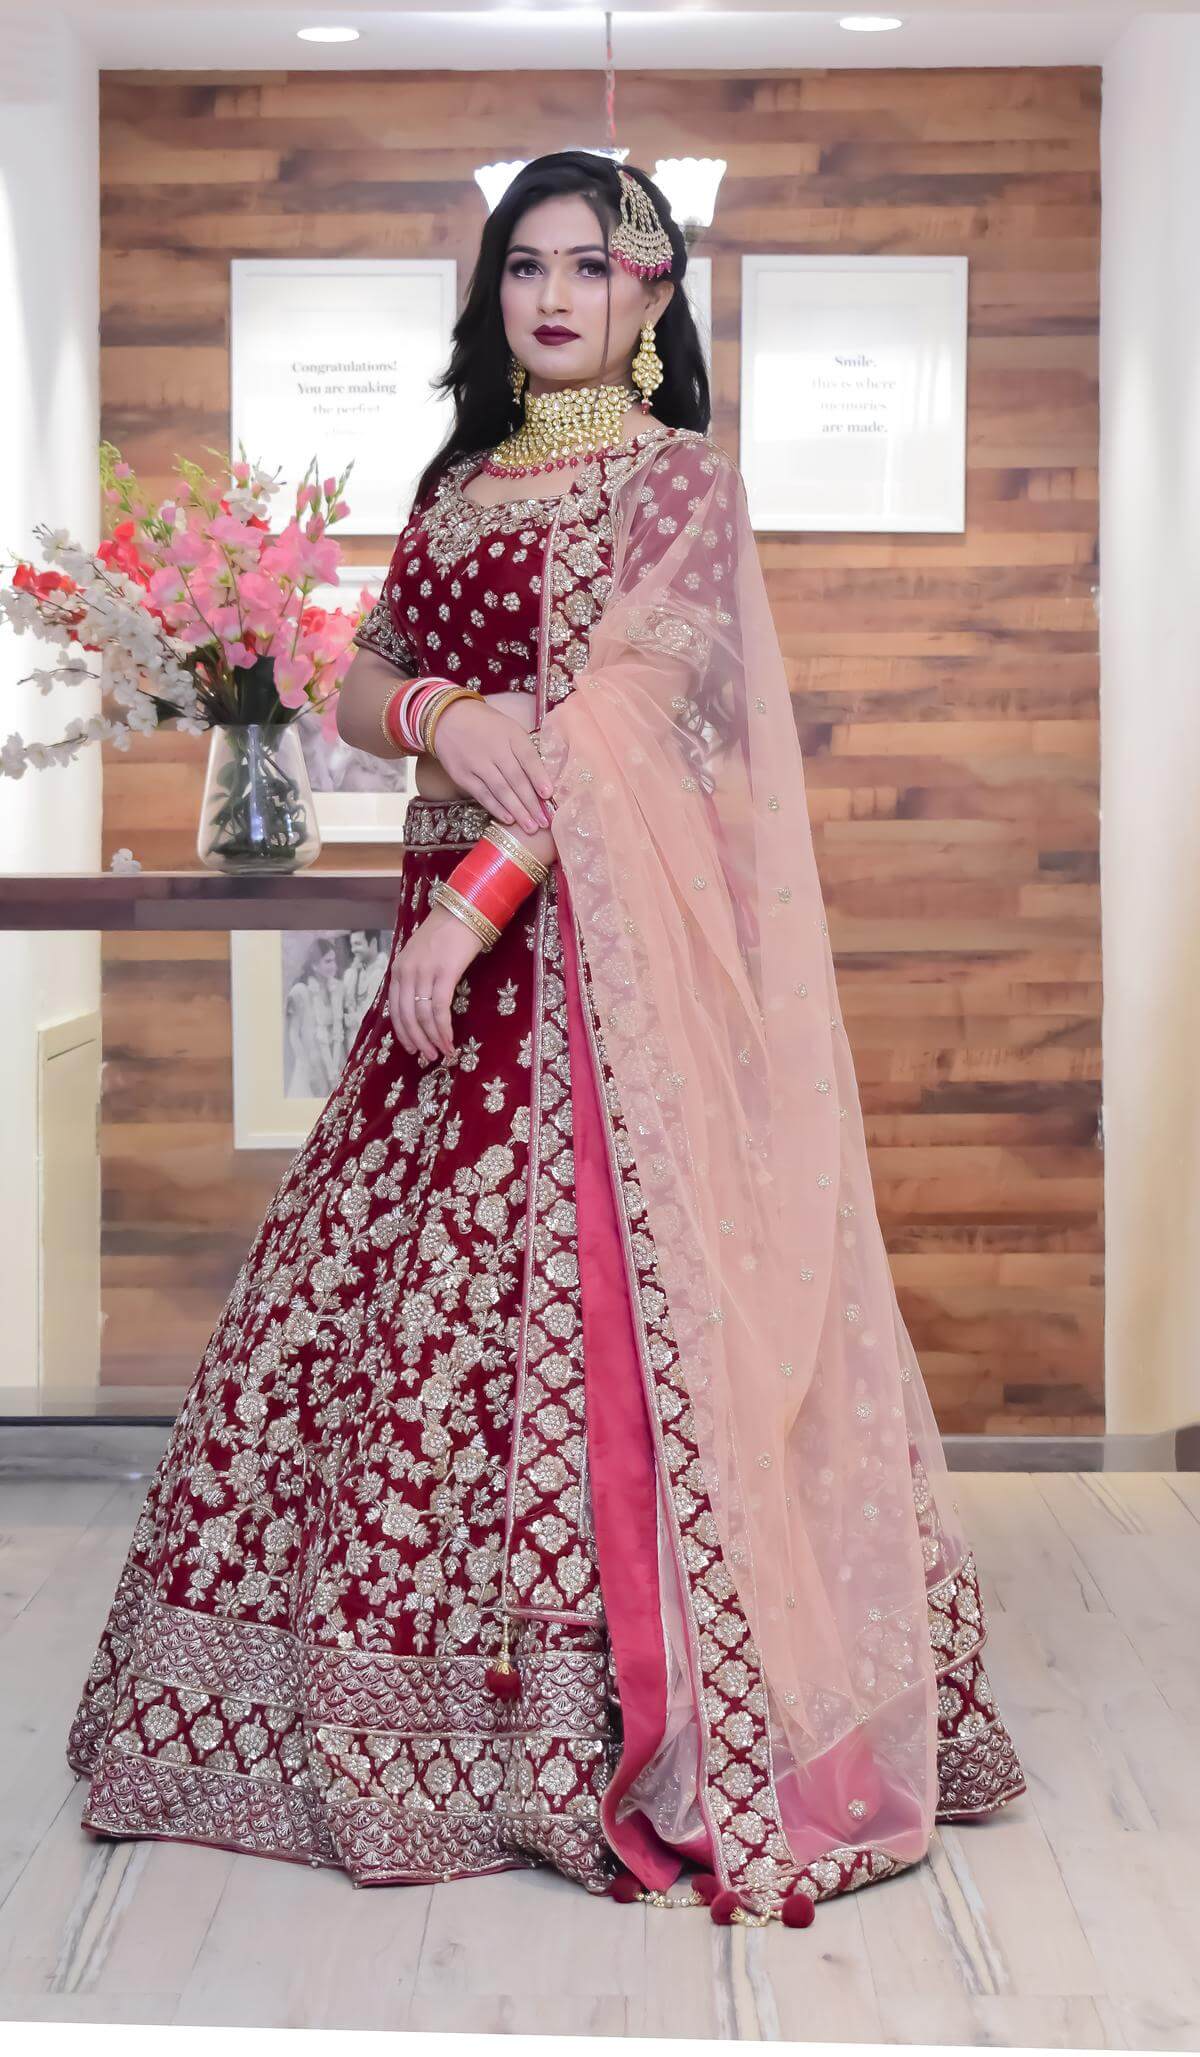 Where To Sell Bridal Lehenga: 7 Websites To Consider